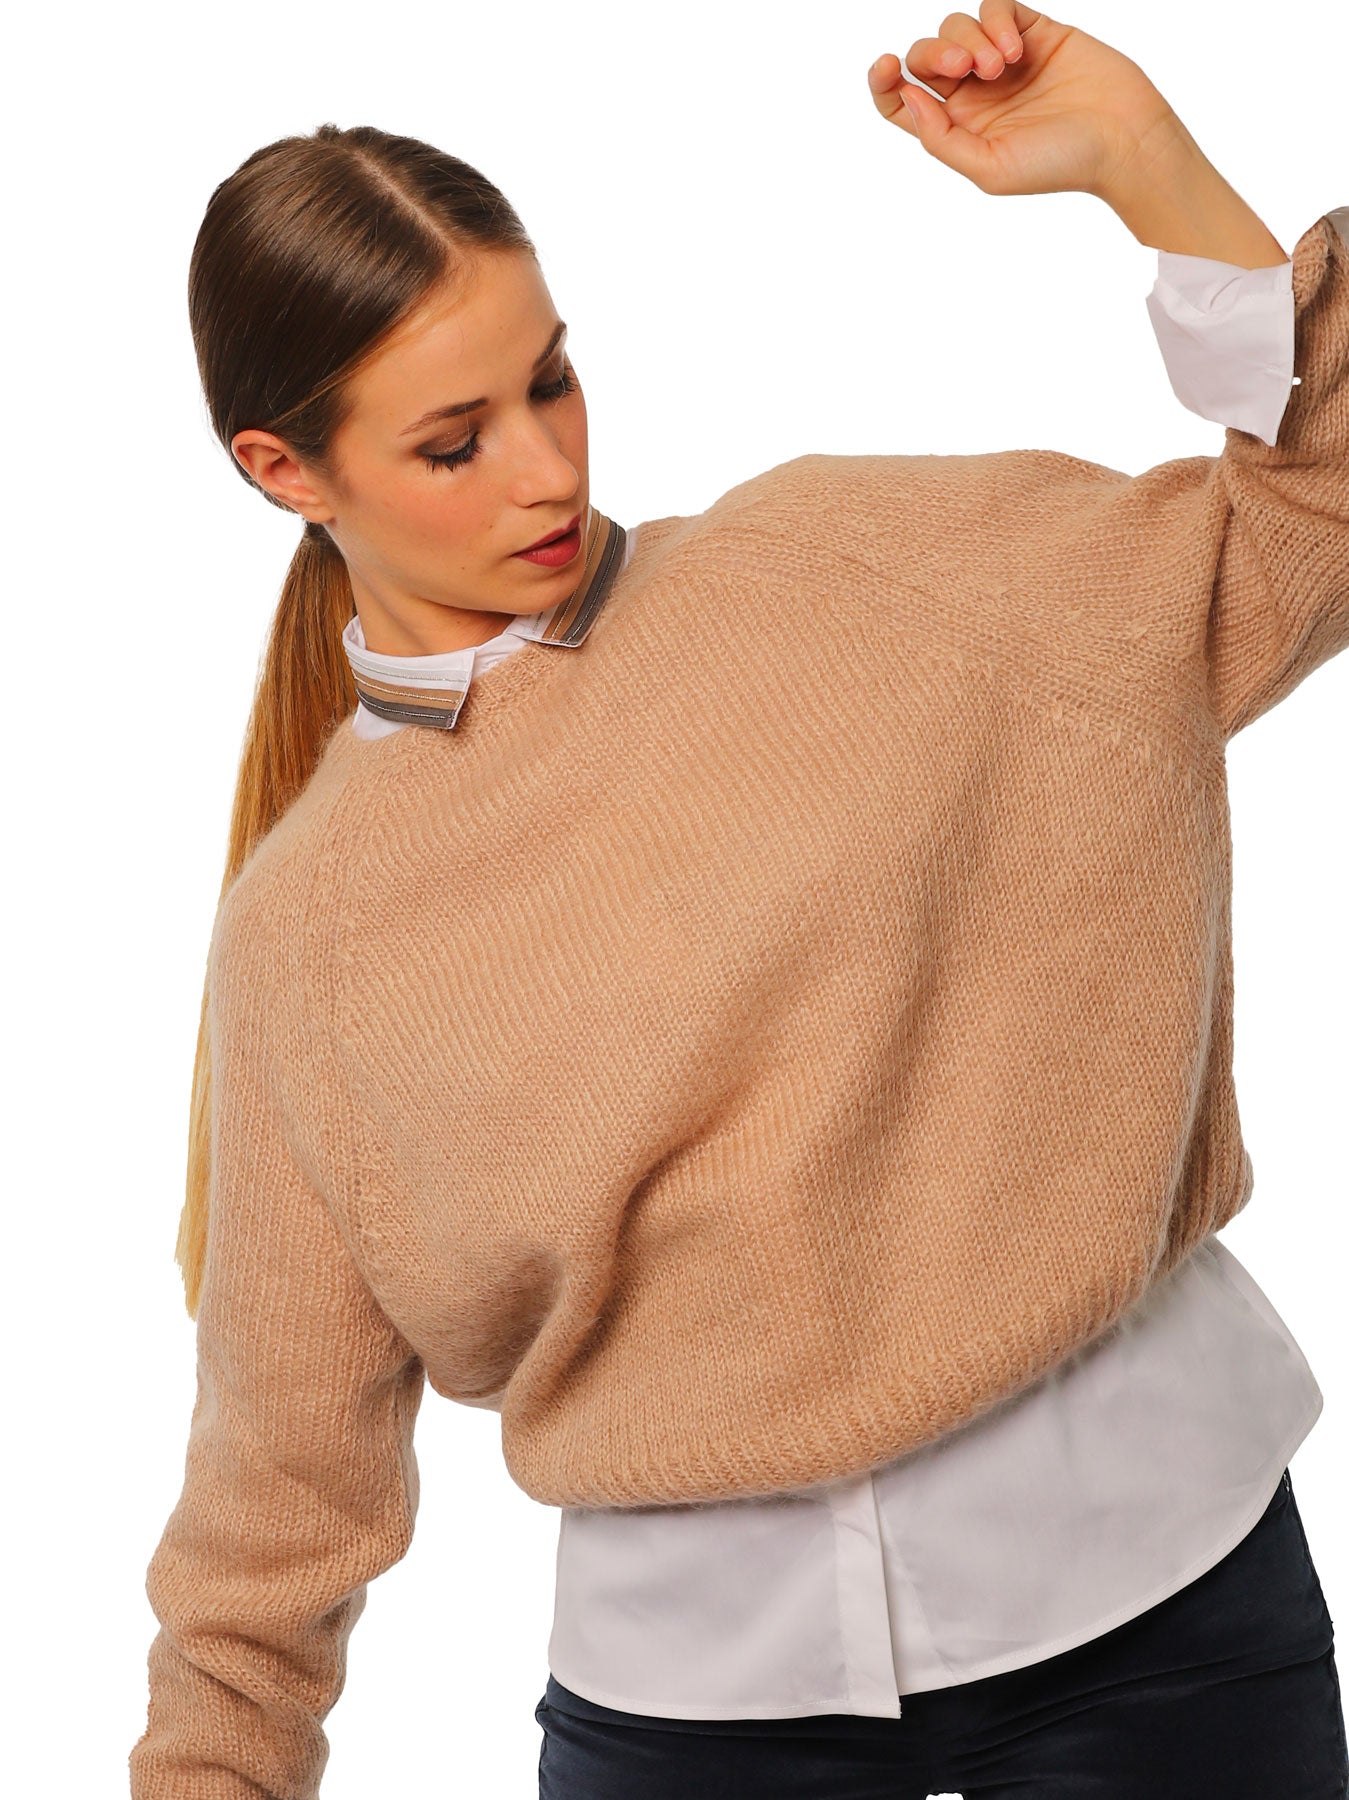 Women's sweater with buttons on the back